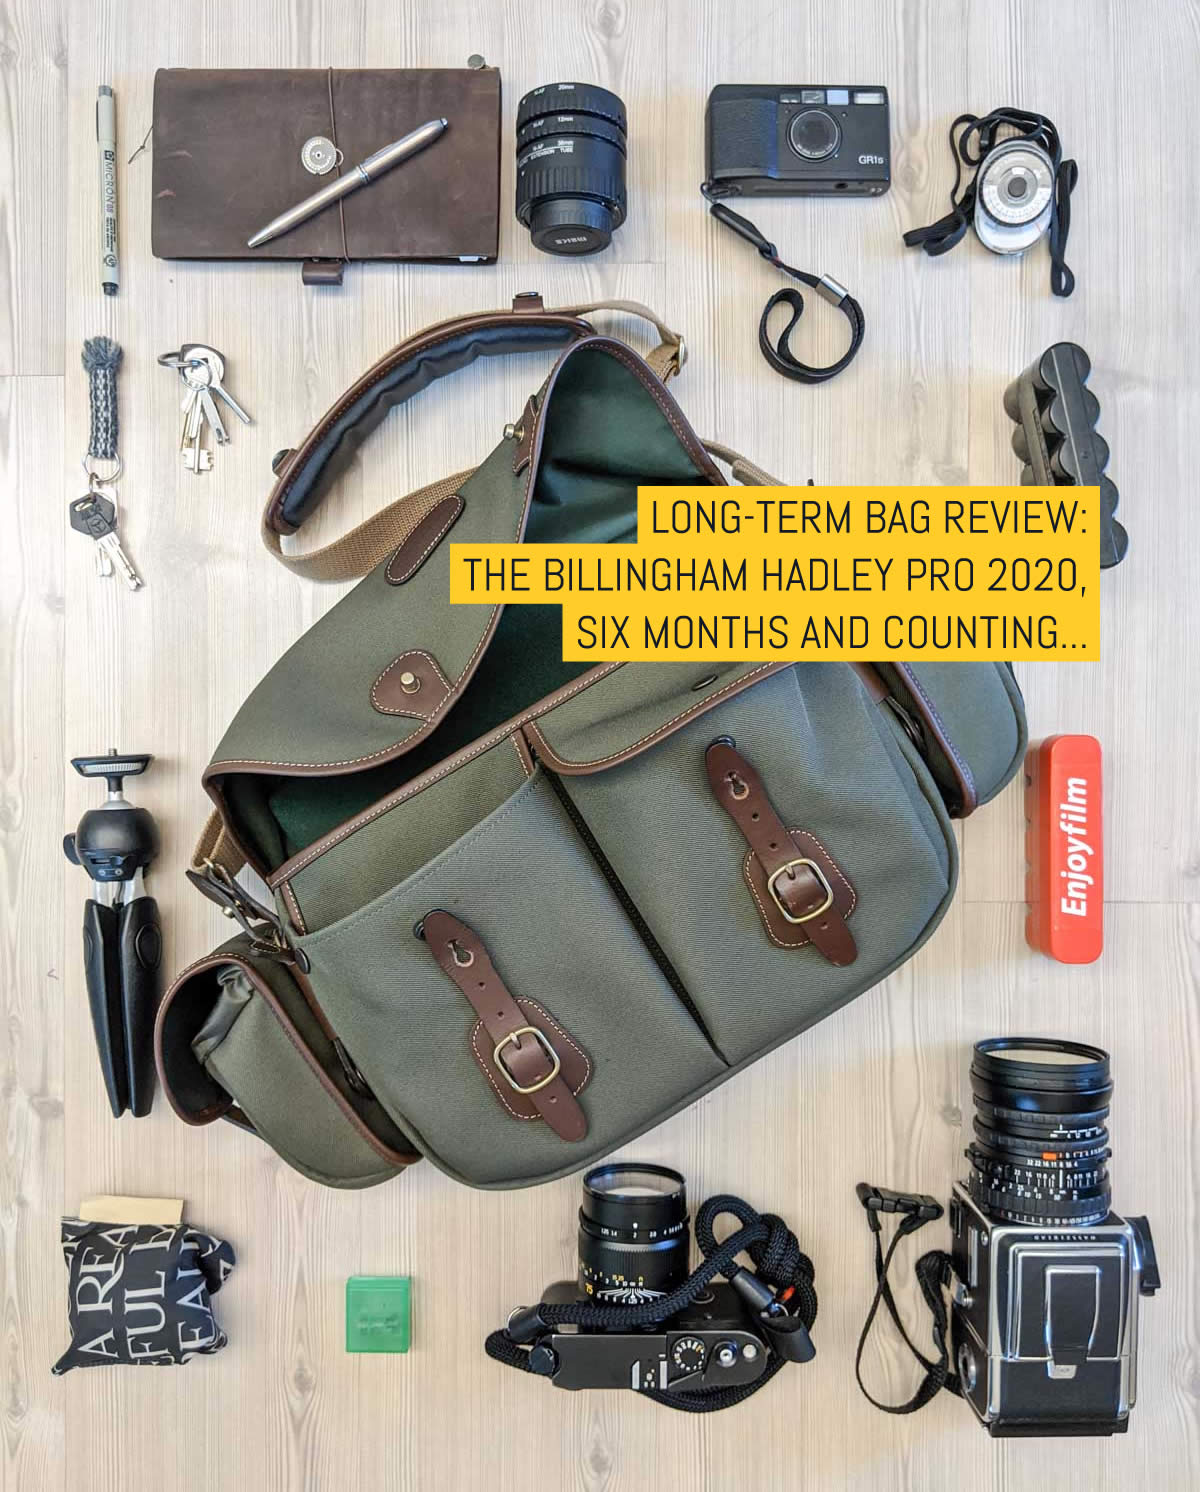 Long-term bag review: The Billingham Hadley Pro 2020, six months and counting…